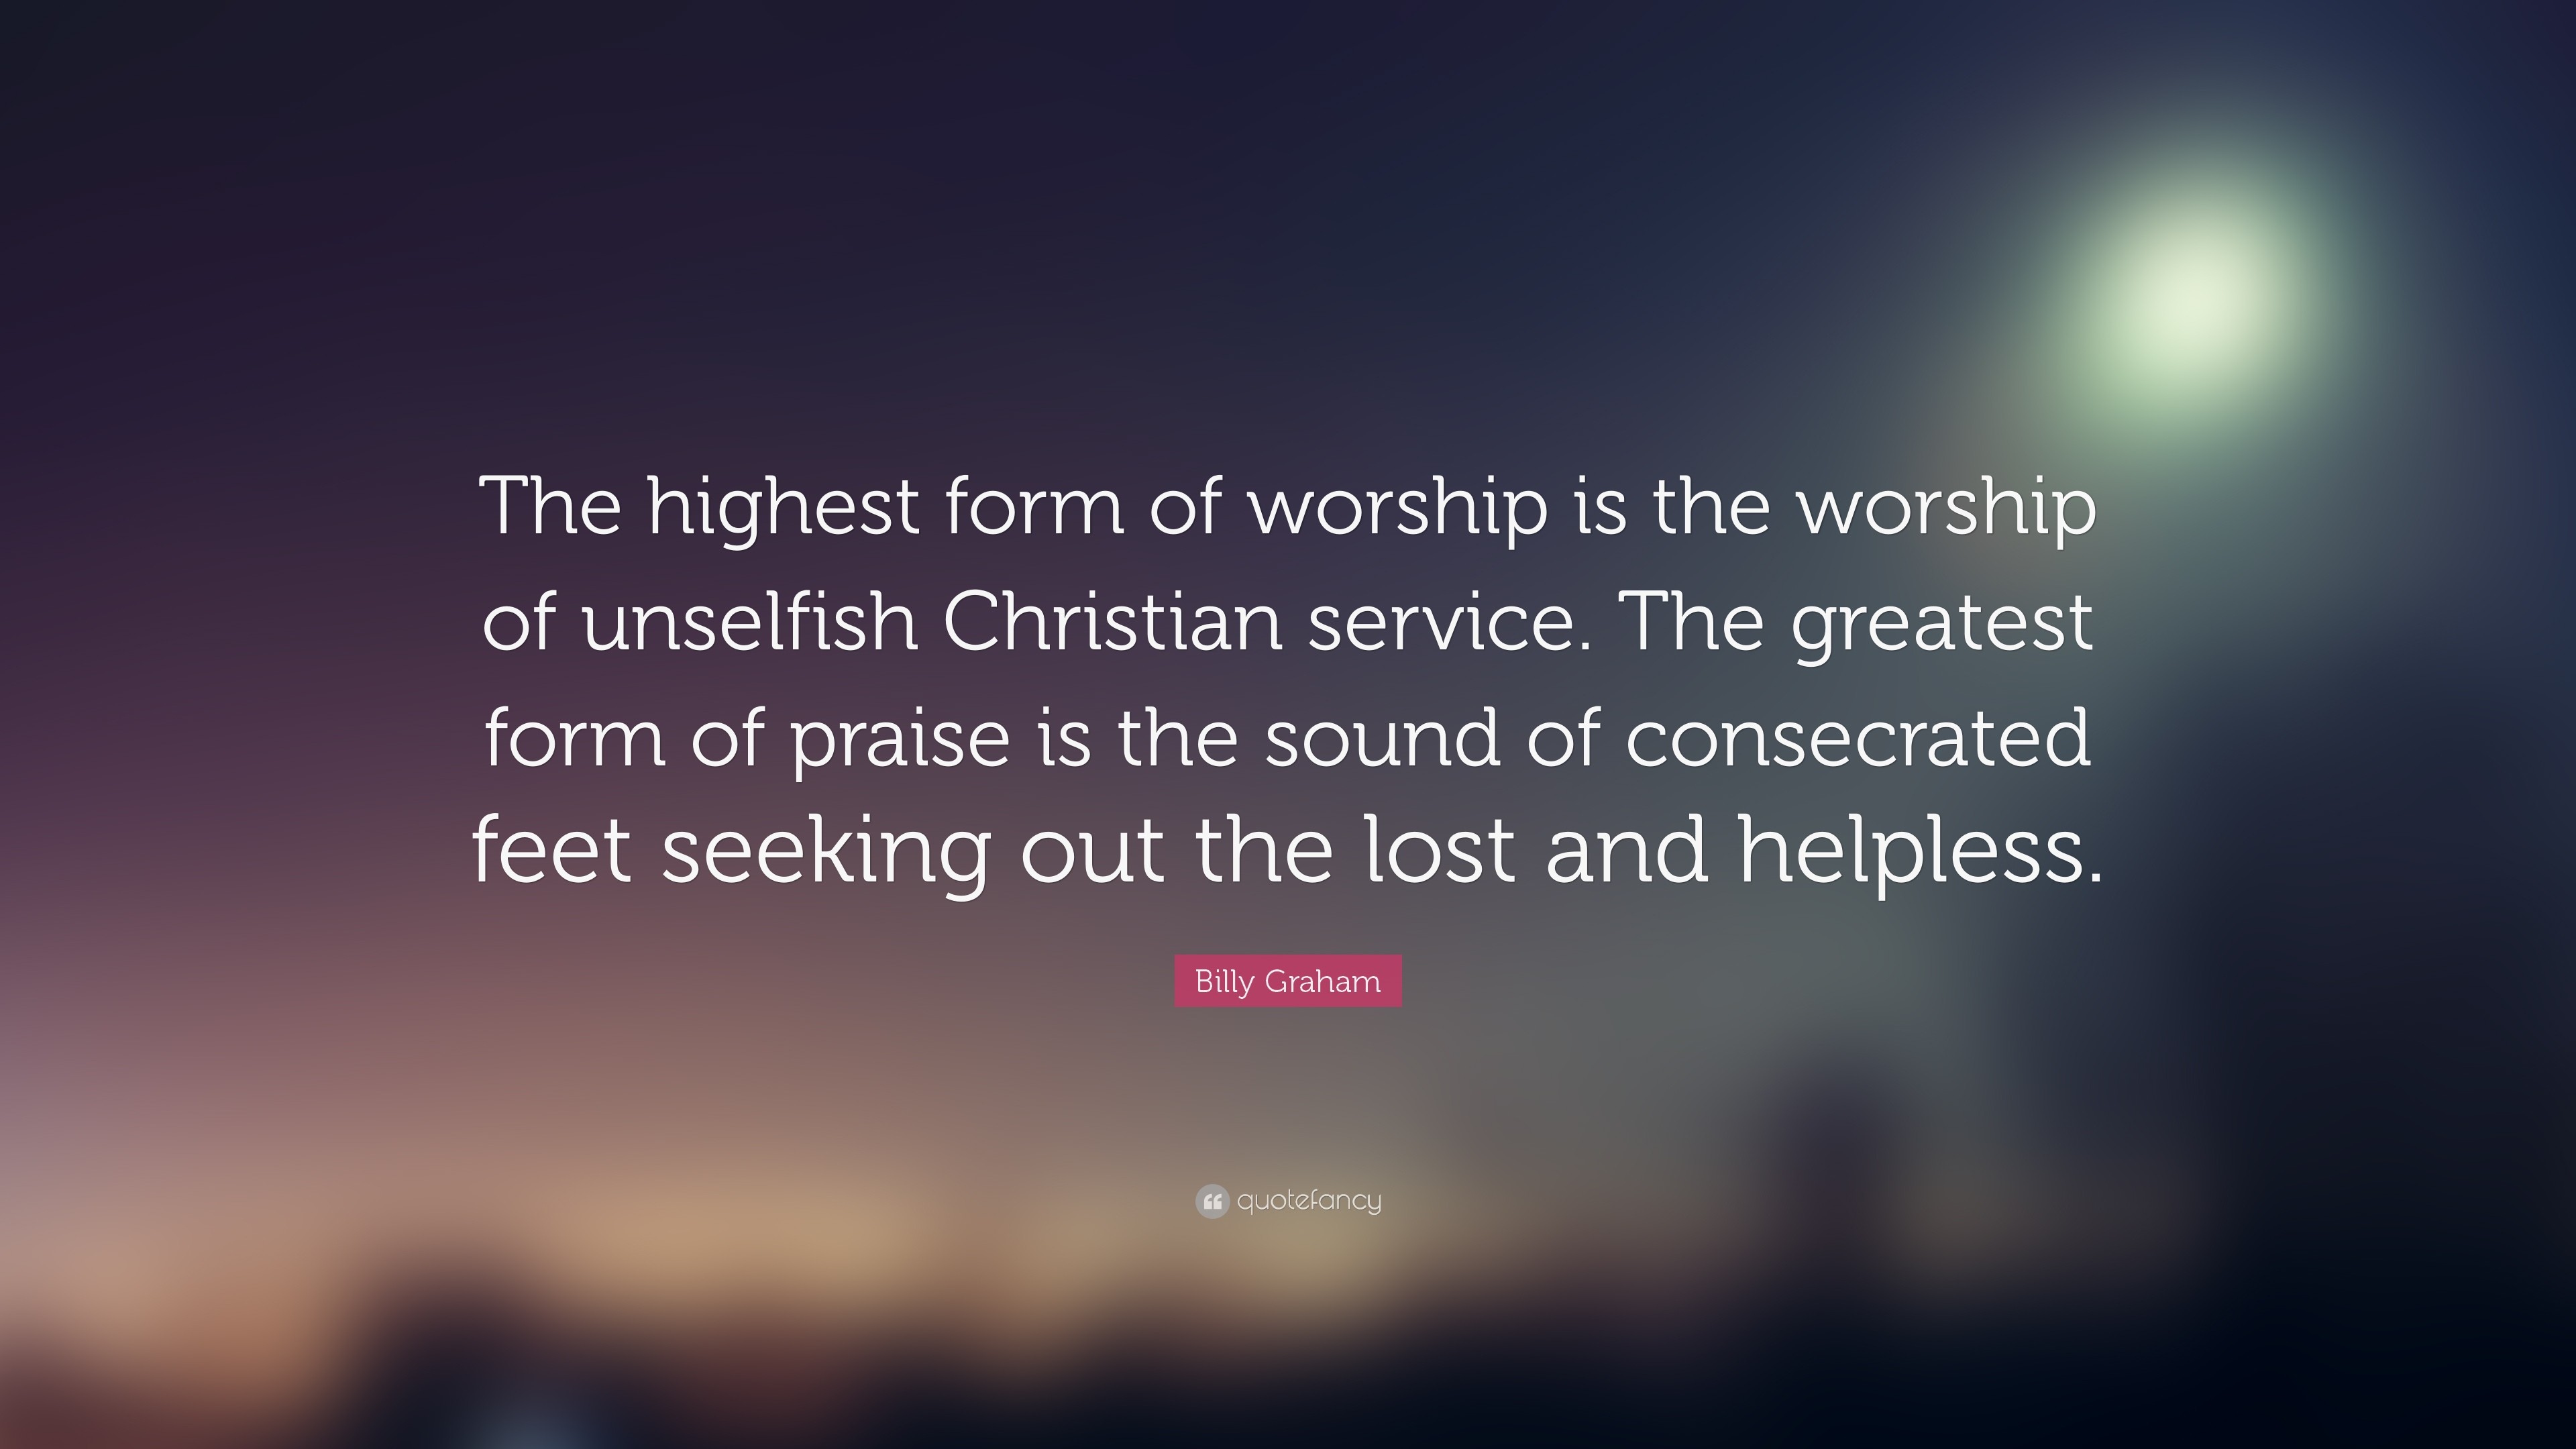 Billy Graham Quote The highest form of worship is the worship of unselfish Christian